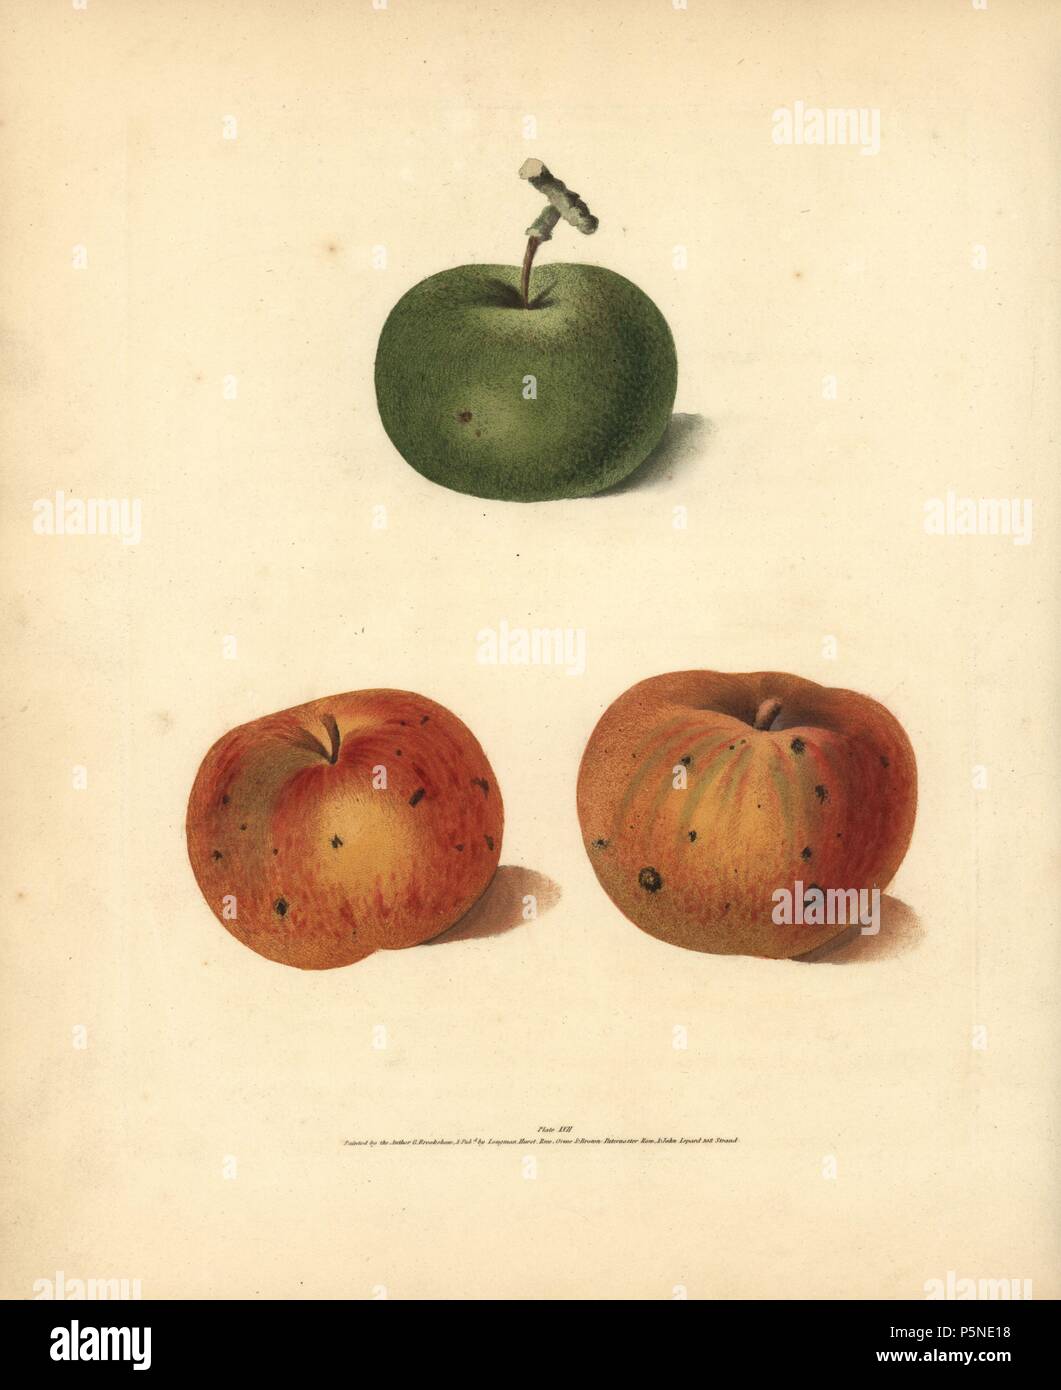 Apple varieties, Malus domestica: Rhenet Gray, Margill and Ripstone Pippin. Handcoloured stipple engraving of an illustration by George Brookshaw from his own 'Pomona Britannica,' London, Longman, Hurst, etc., 1817. The quarto edition of the original folio edition published from 1804-1812. Brookshaw (1751-1823) was a successful cabinet maker who disappeared in the 1790s before returning as a flower painter with the anonymous 'New Treatise on Flower Painting,' 1797. Stock Photo